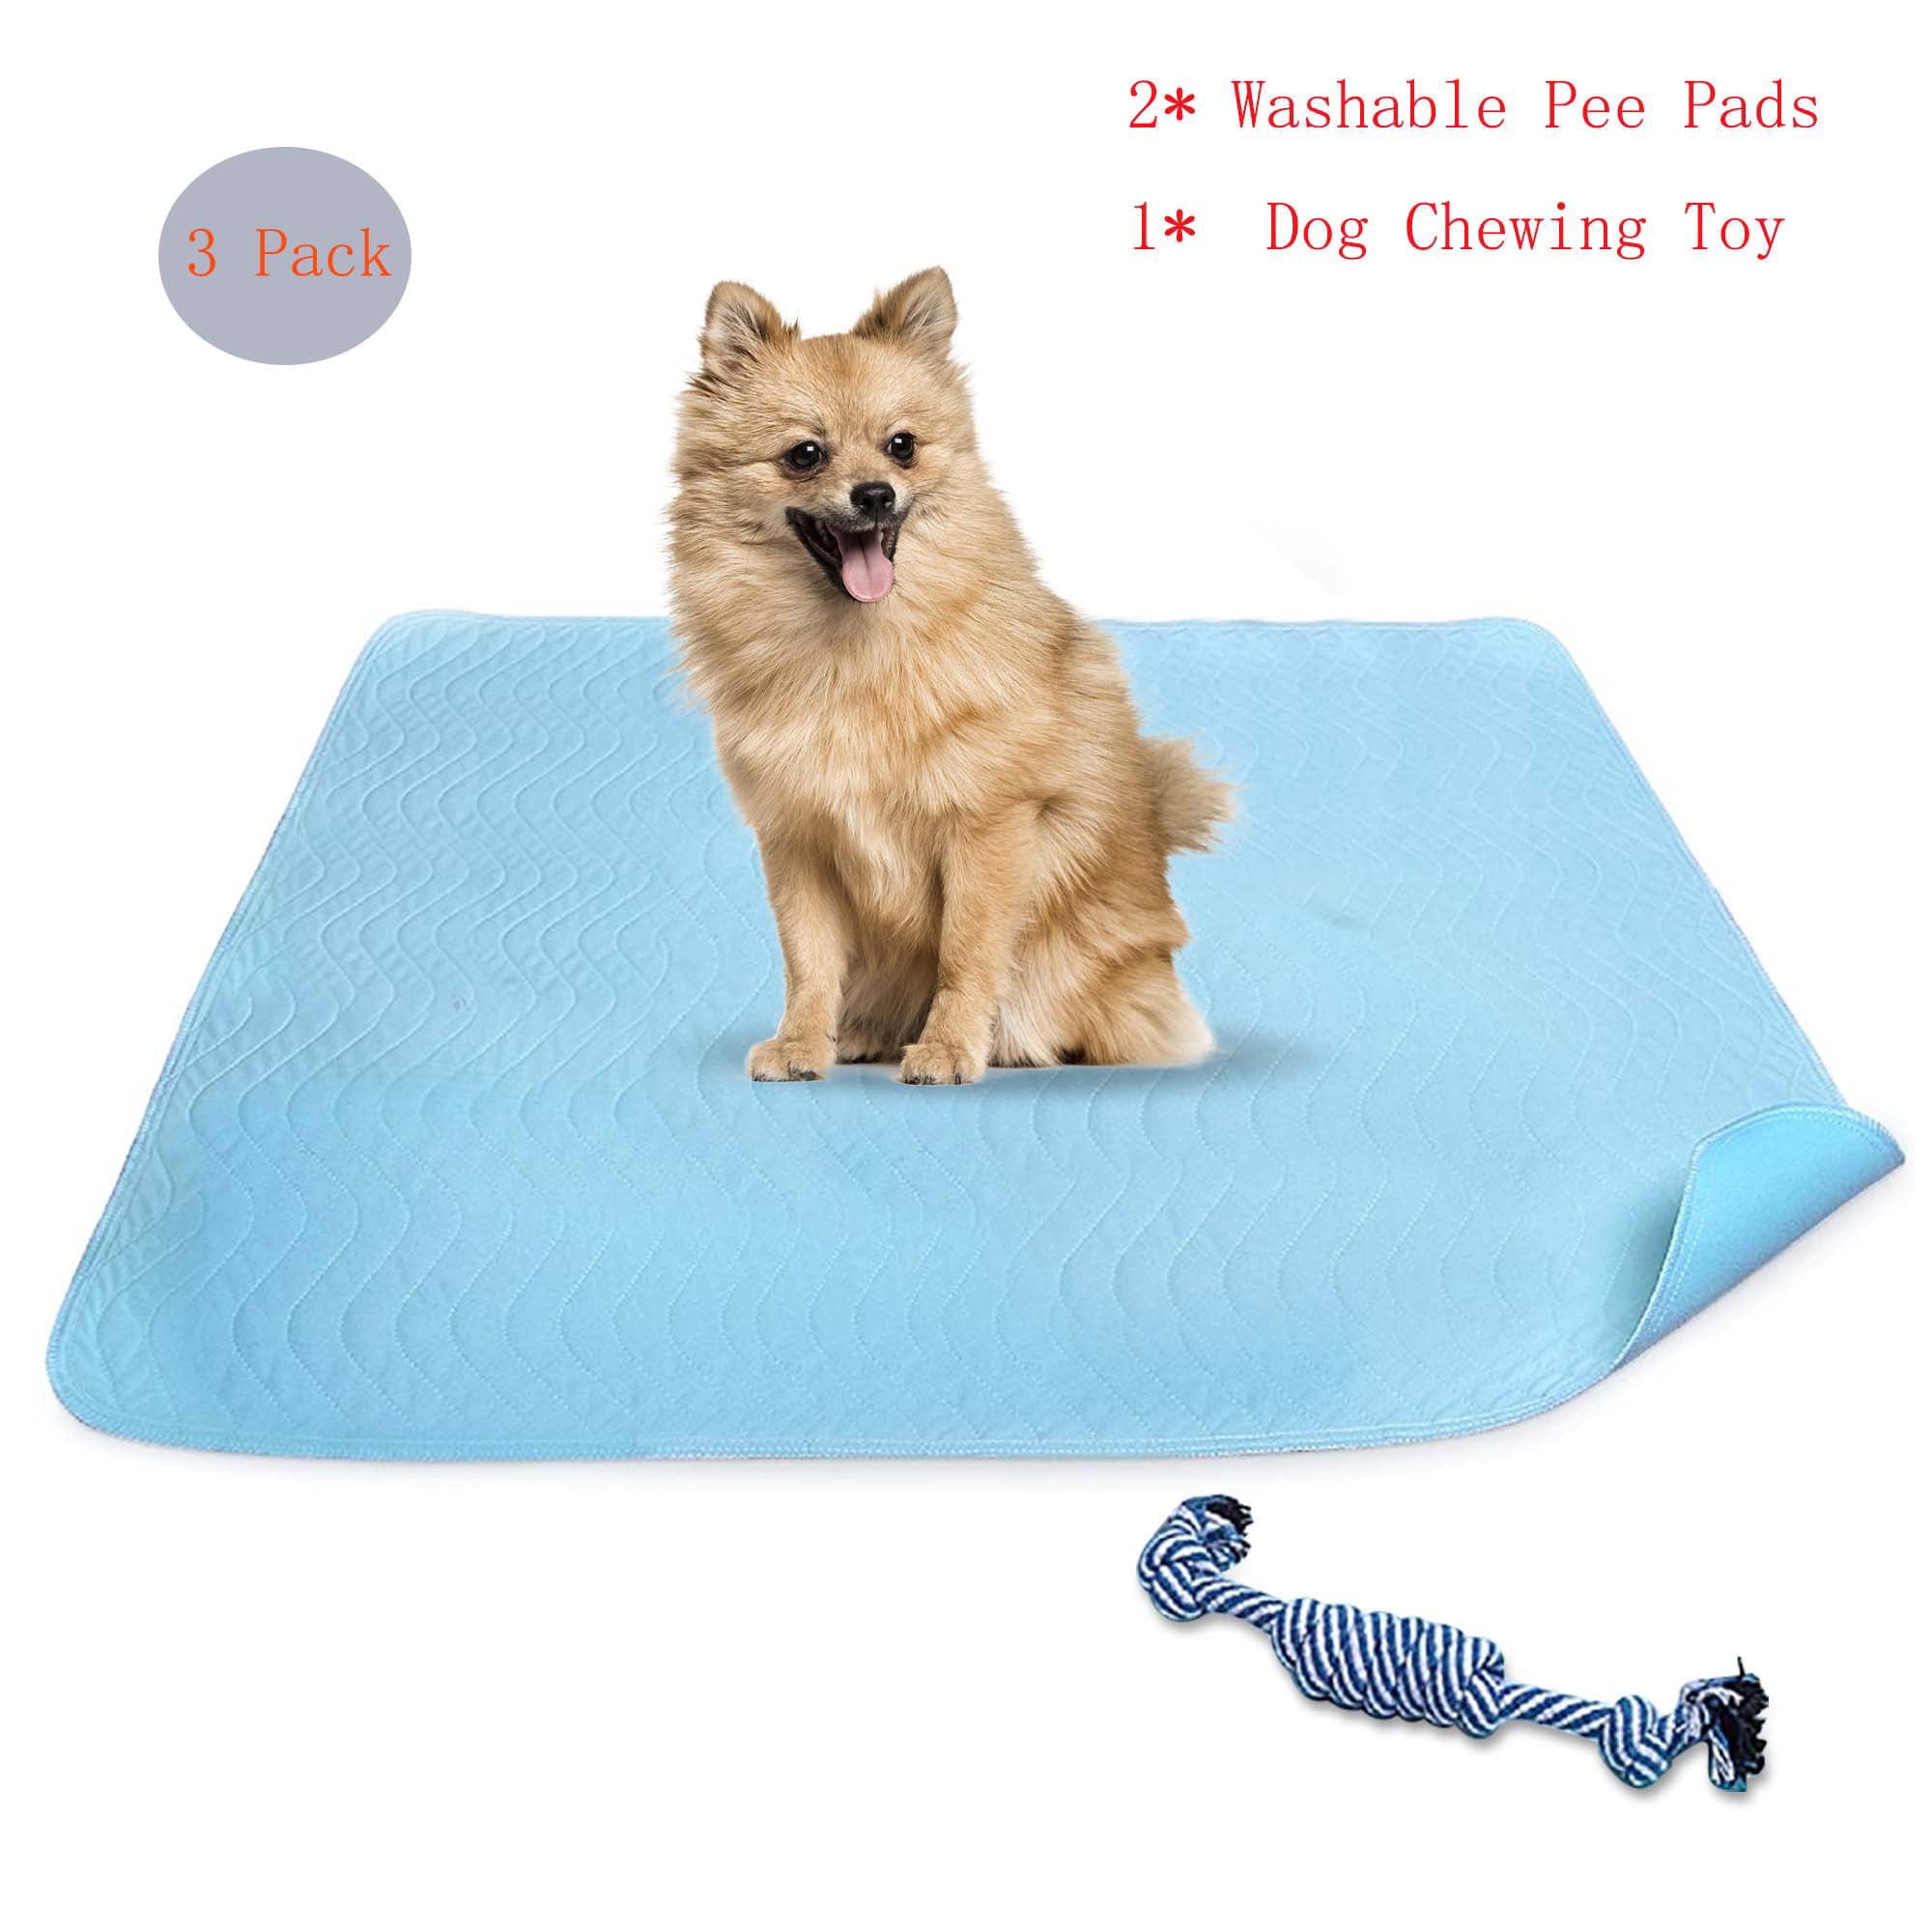 Drymate Washable Potty Pad, Training Mat to Contain Liquids - For